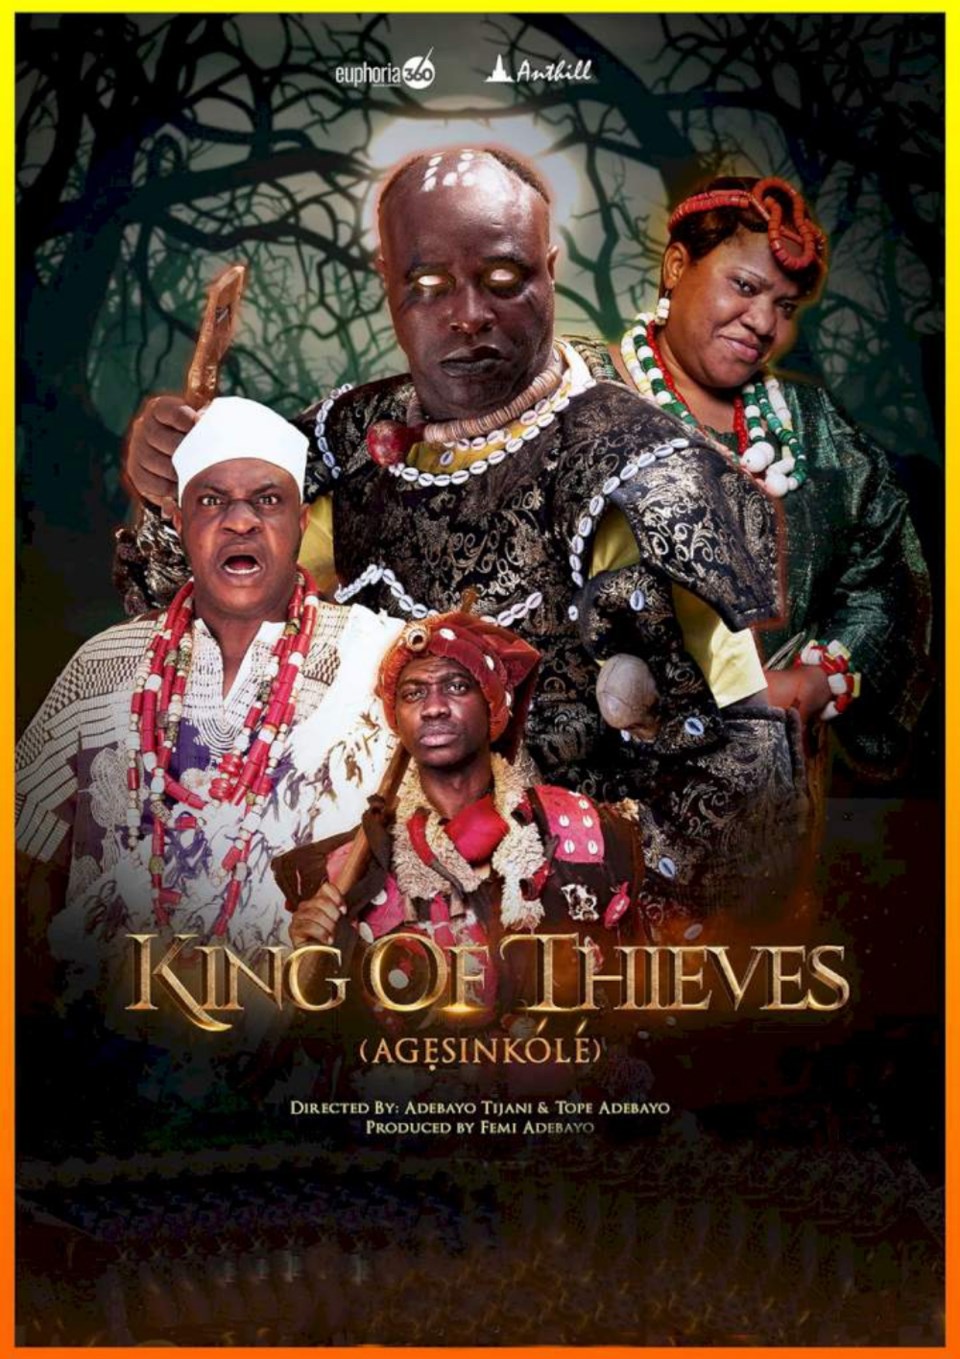 King of thieves 